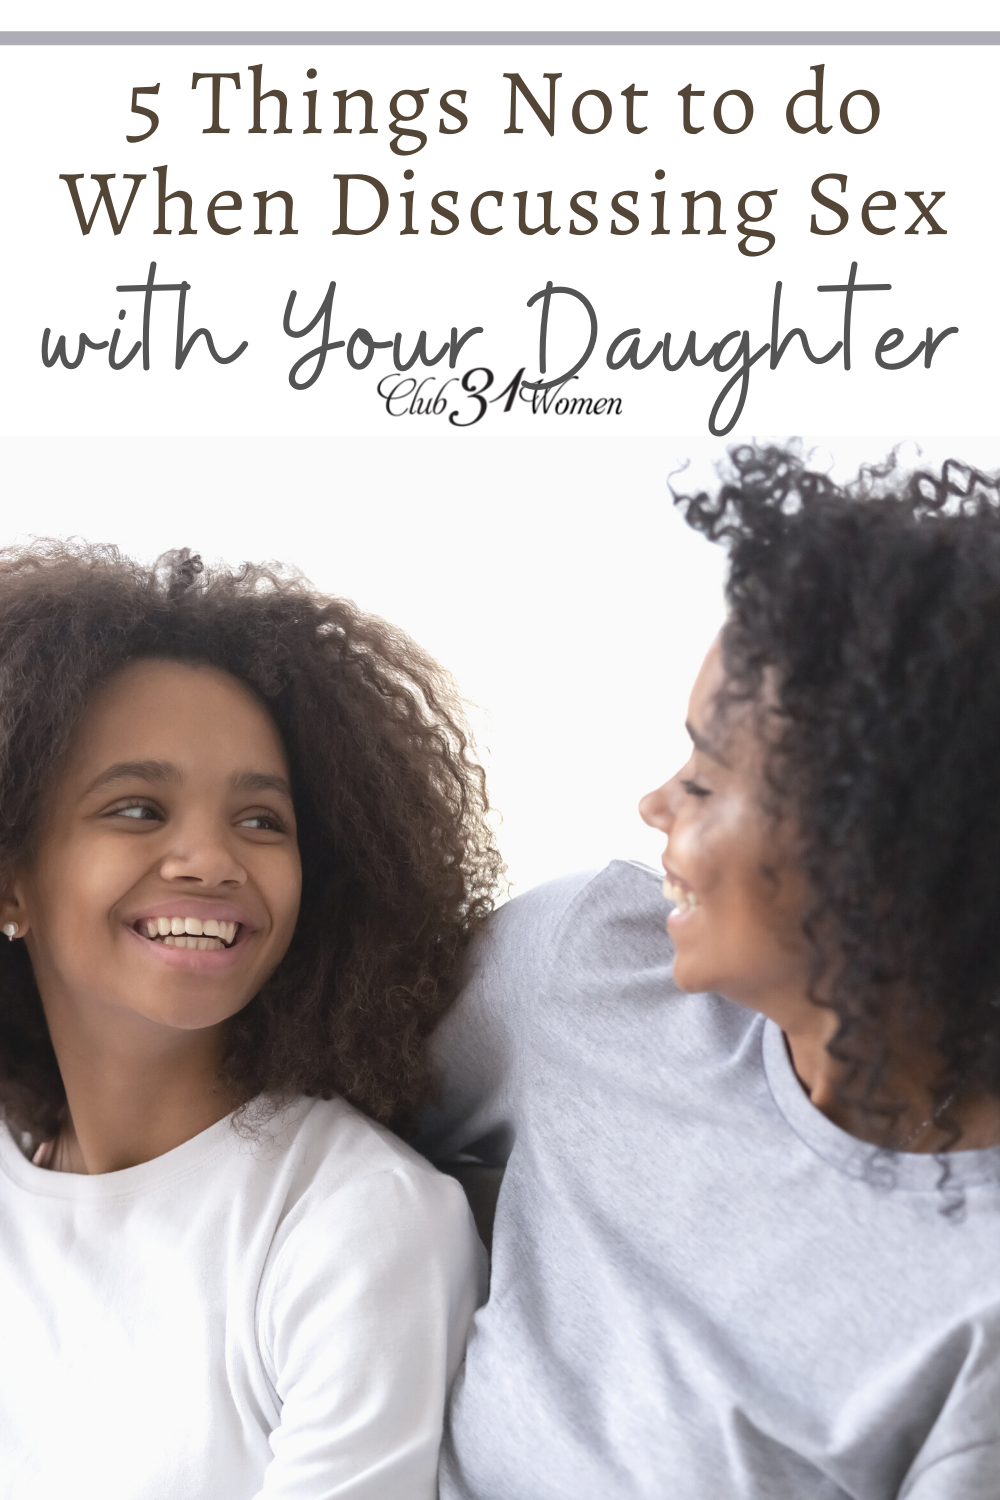 Discussing sex with our daughters may not be the easiest topic to approach, but it is a necessary one. Yet there are a few things we need to avoid doing. via @Club31Women